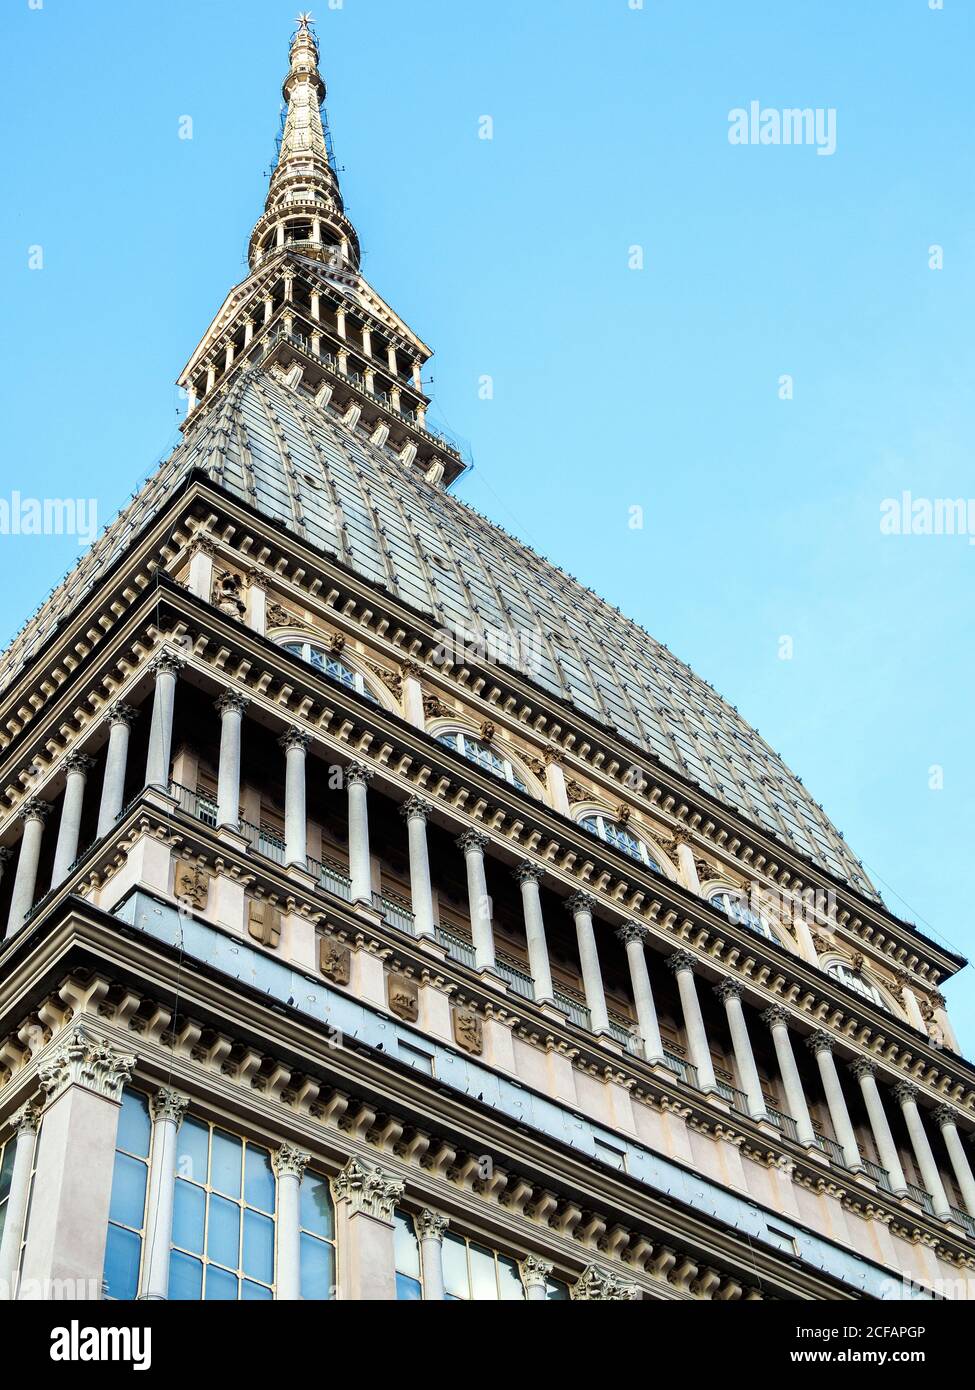 Detail of the Mole Antonelliana that houses the National Museum of Cinema - Turin, Italy, Stock Photo